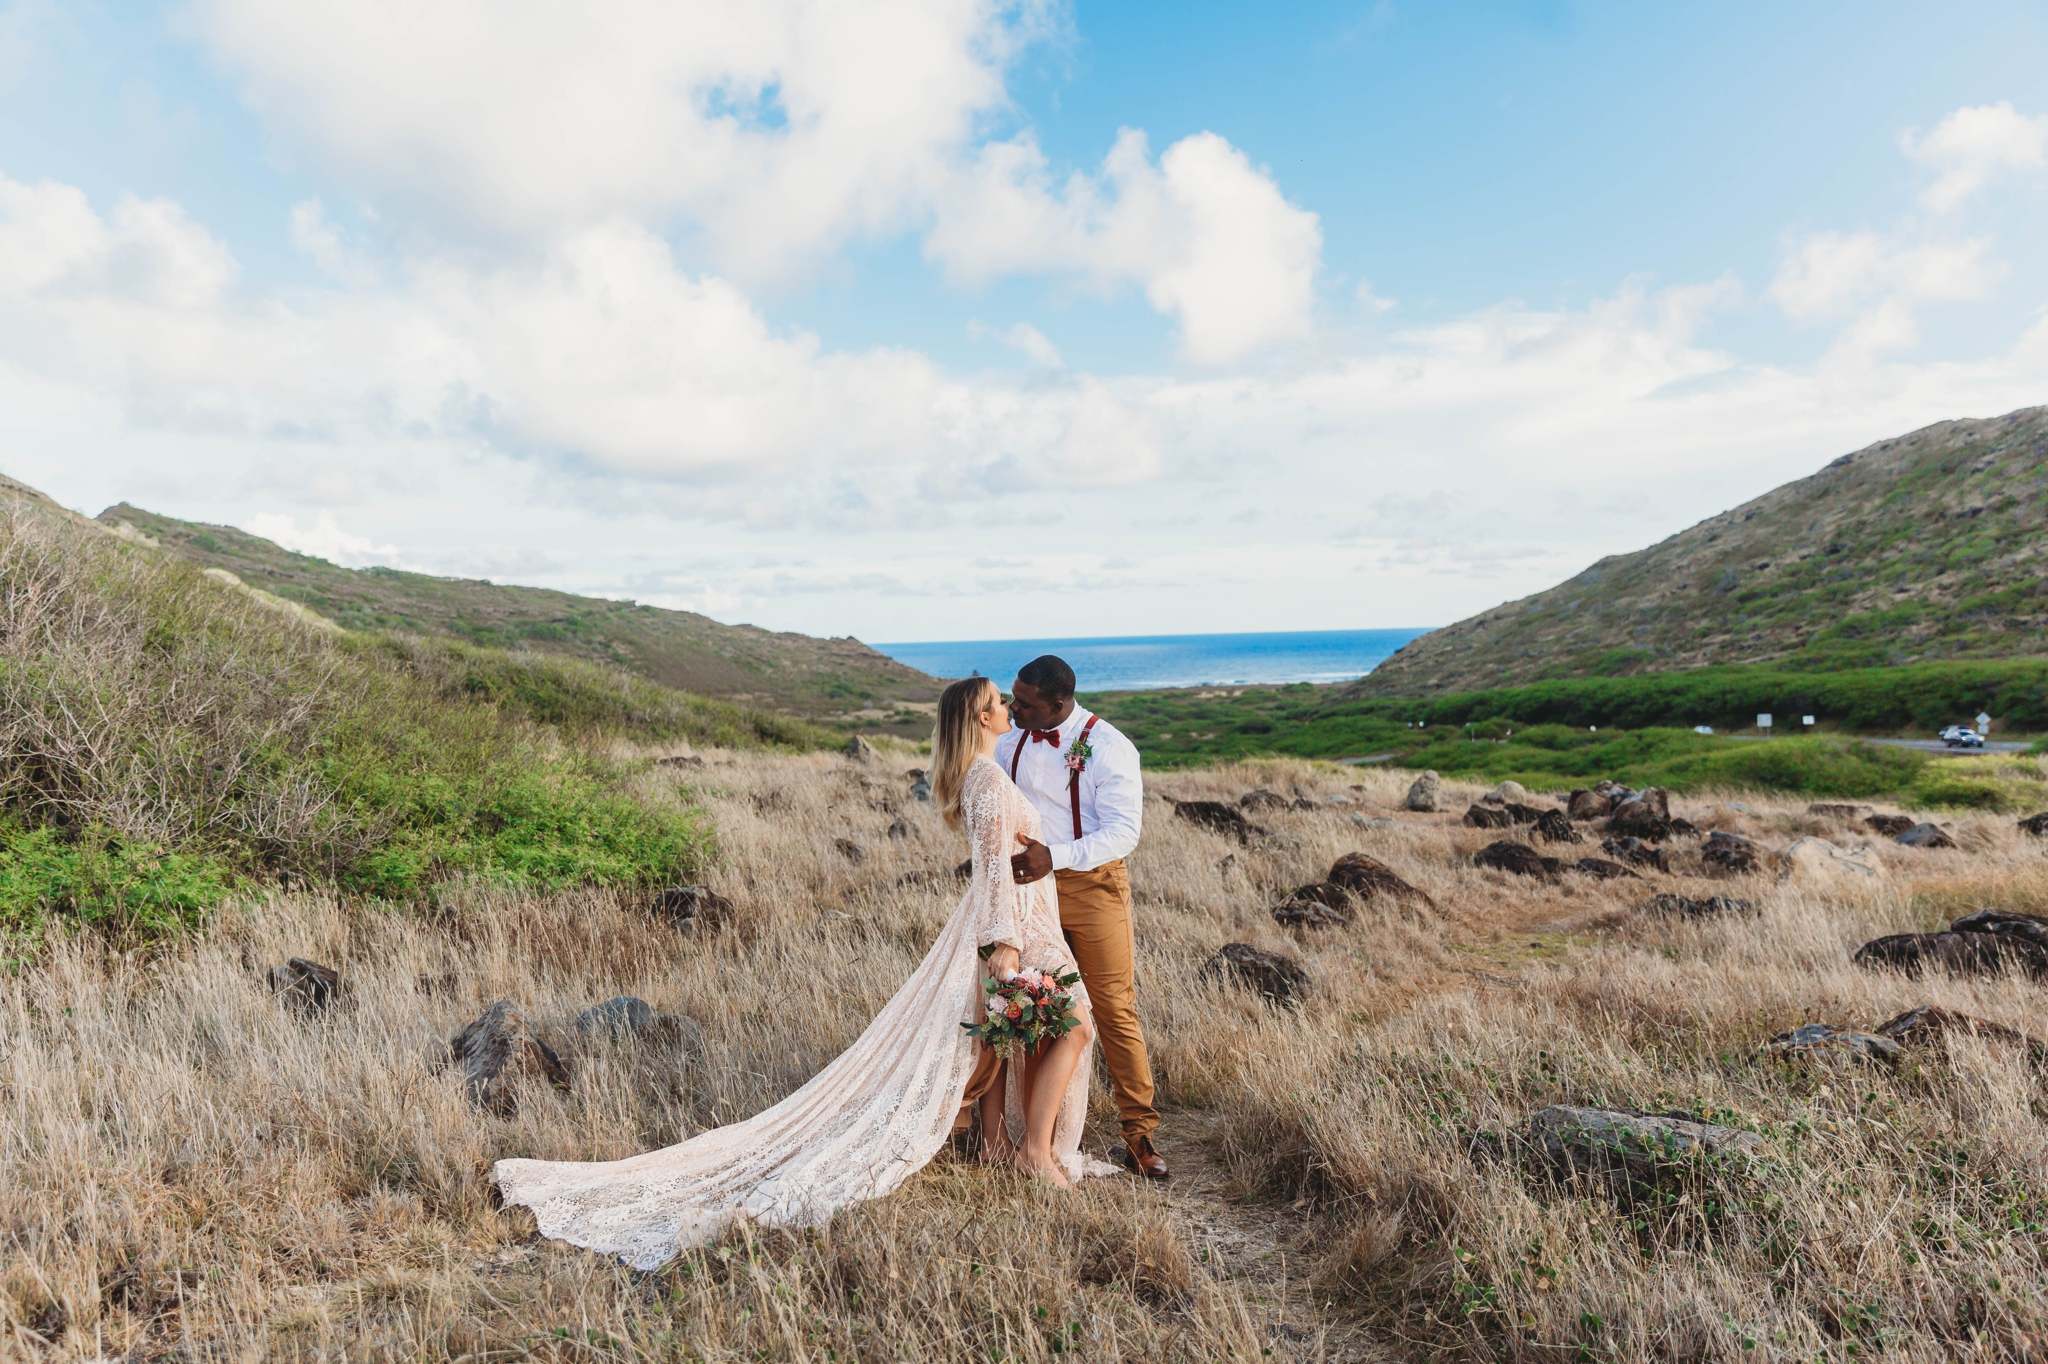  Elopement at Makapuu Lookout, Waimanalo, HI - Oahu Hawaii Engagement Photographer - Bride in a flowy fringe boho wedding dress - in grassy mountains with the ocean in the back - lanikai lookout - deutsche hochzeits fotografin in hawaii  